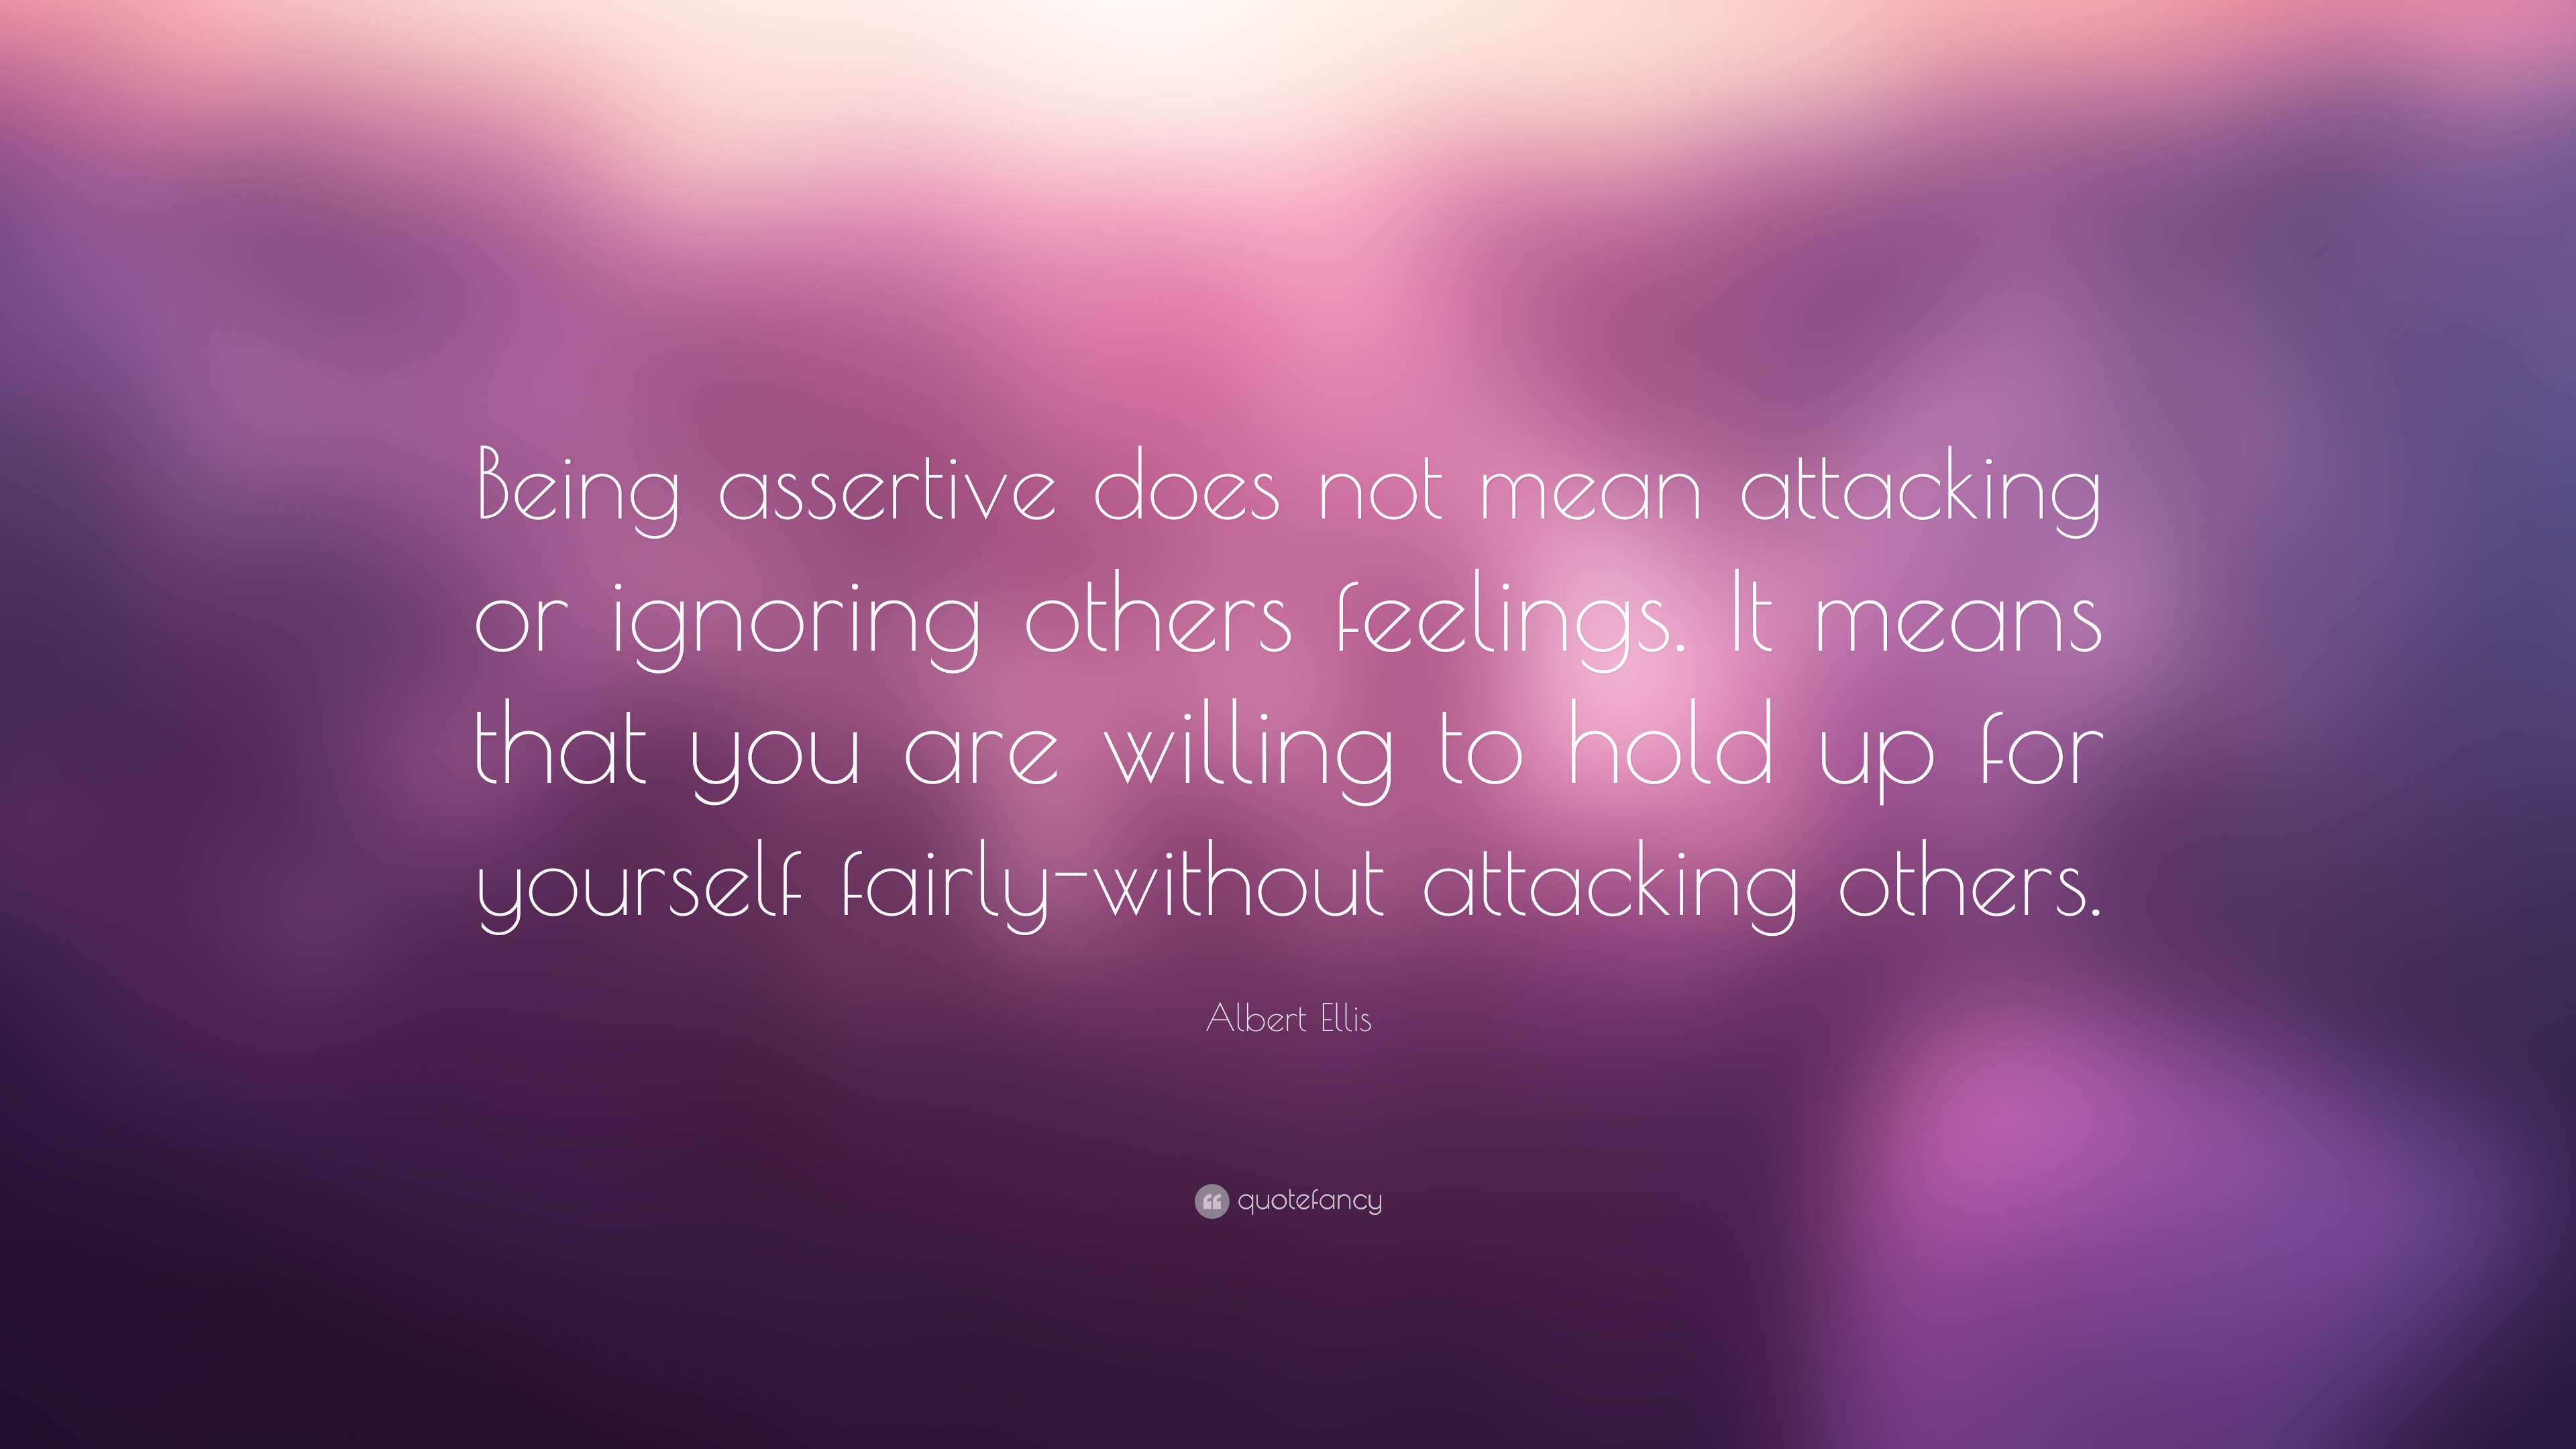 Albert Ellis Quote: “Being assertive does not mean attacking or